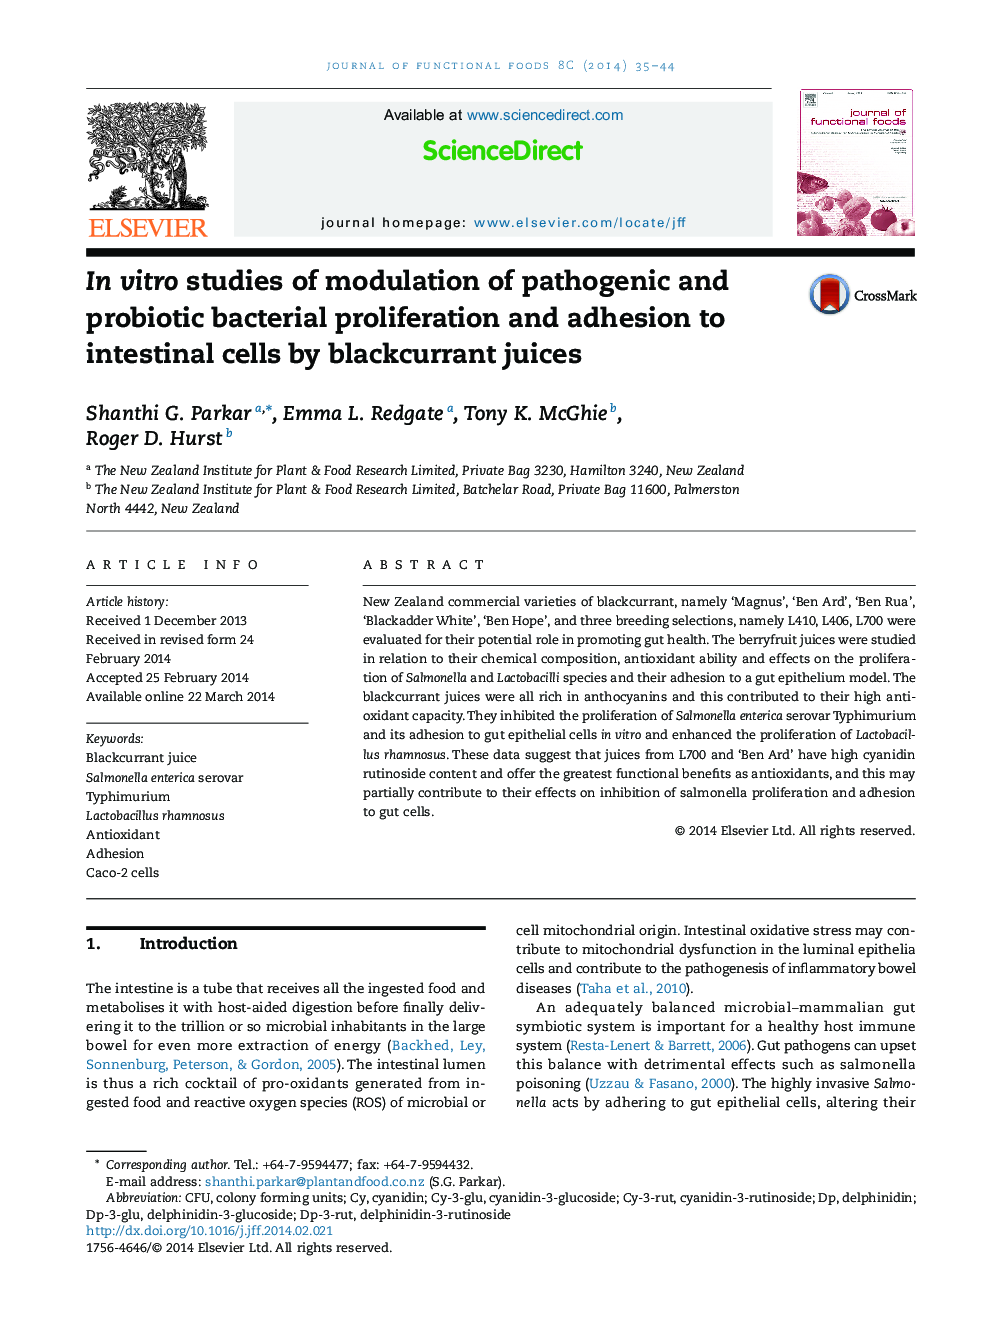 In vitro studies of modulation of pathogenic and probiotic bacterial proliferation and adhesion to intestinal cells by blackcurrant juices